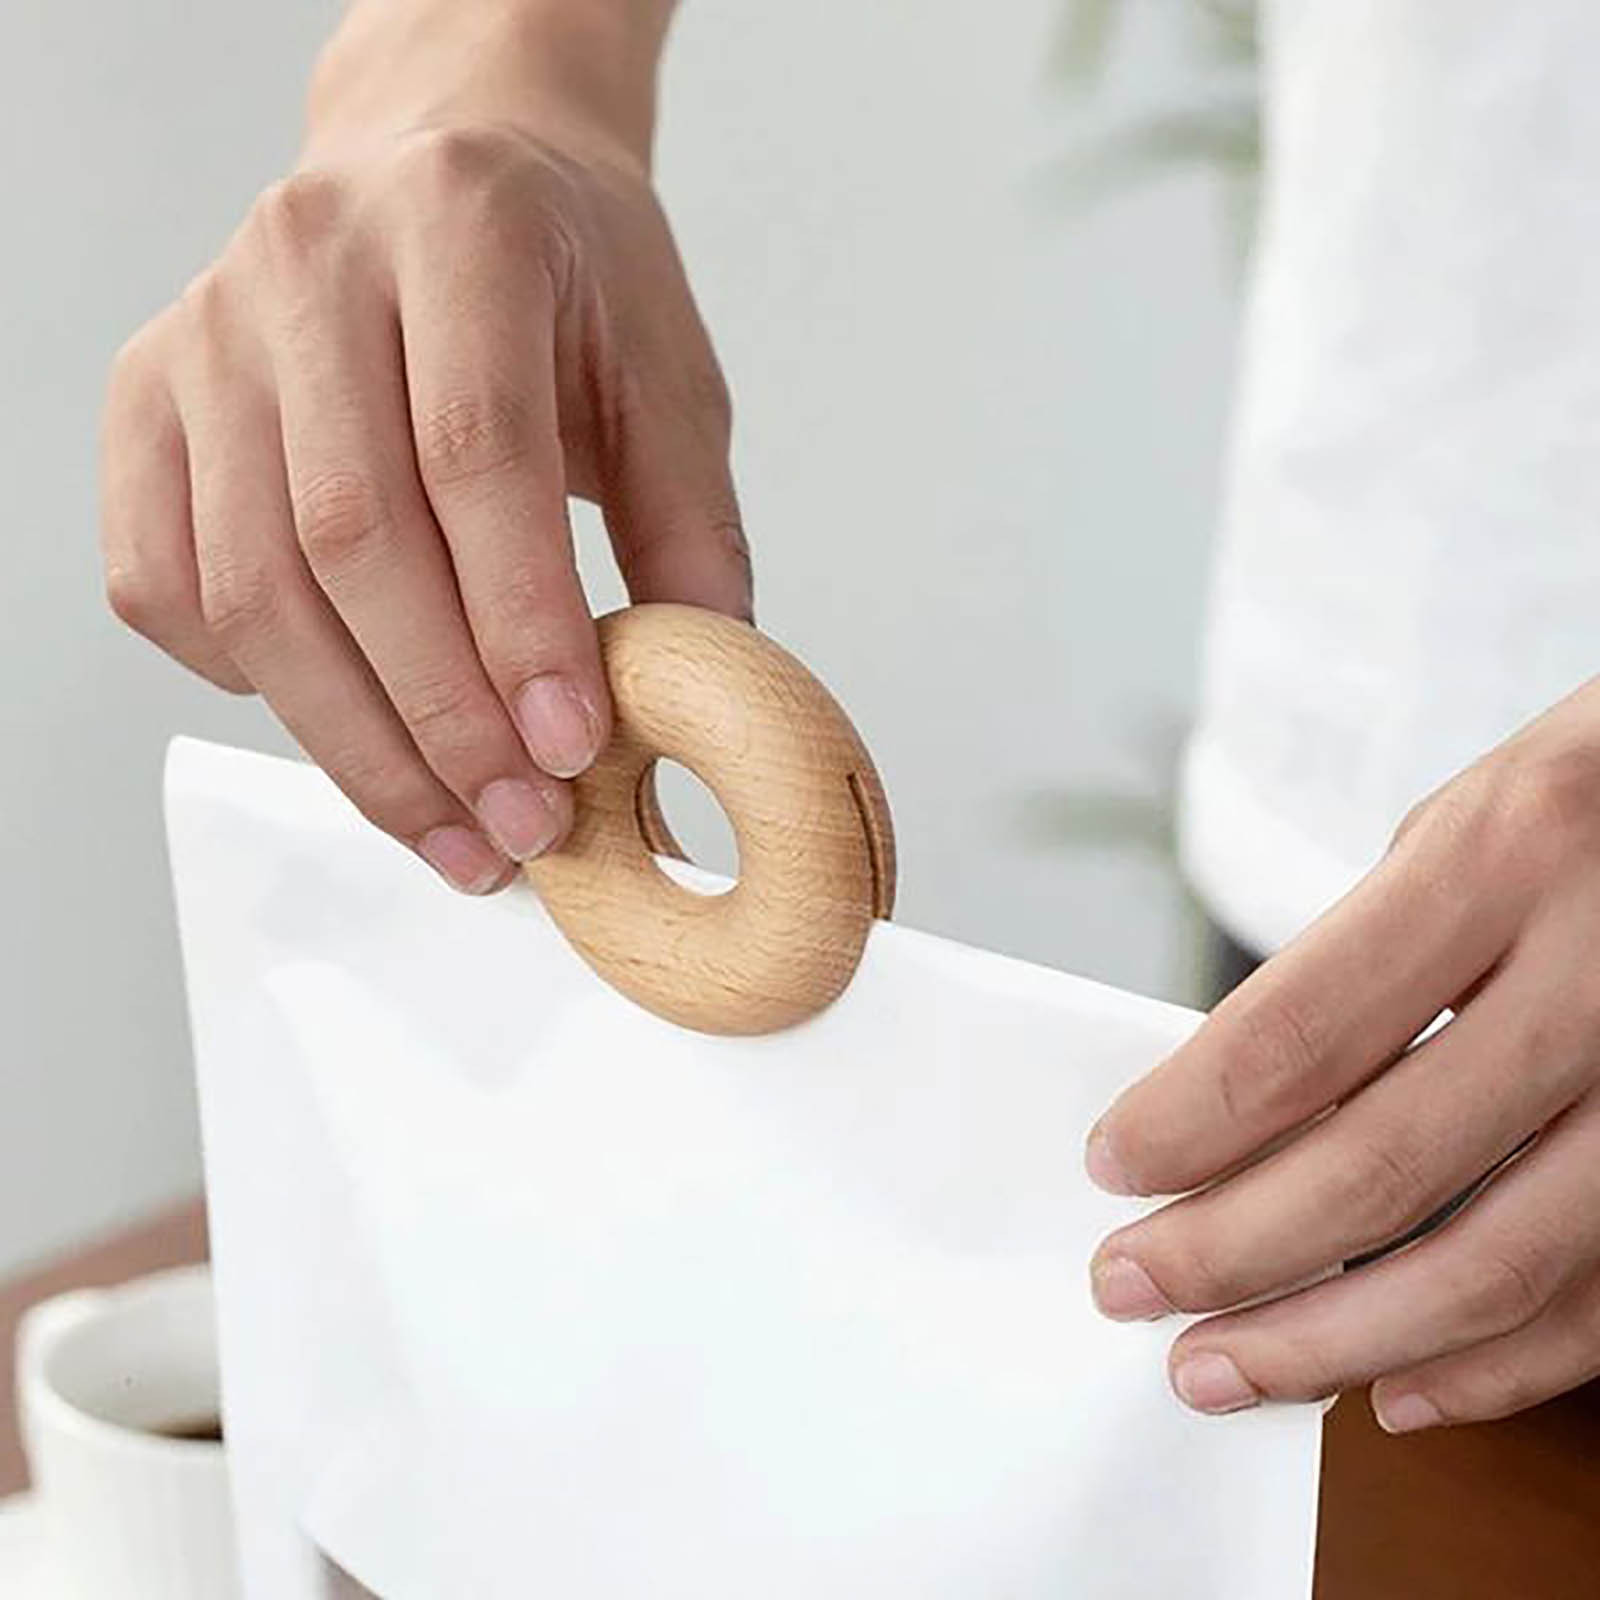 Garment Clips Wooden Donut Sealing Clip Environmental Protection Kitchen Snack Sealing Clip Sewing Photo Paper Clamps Holder